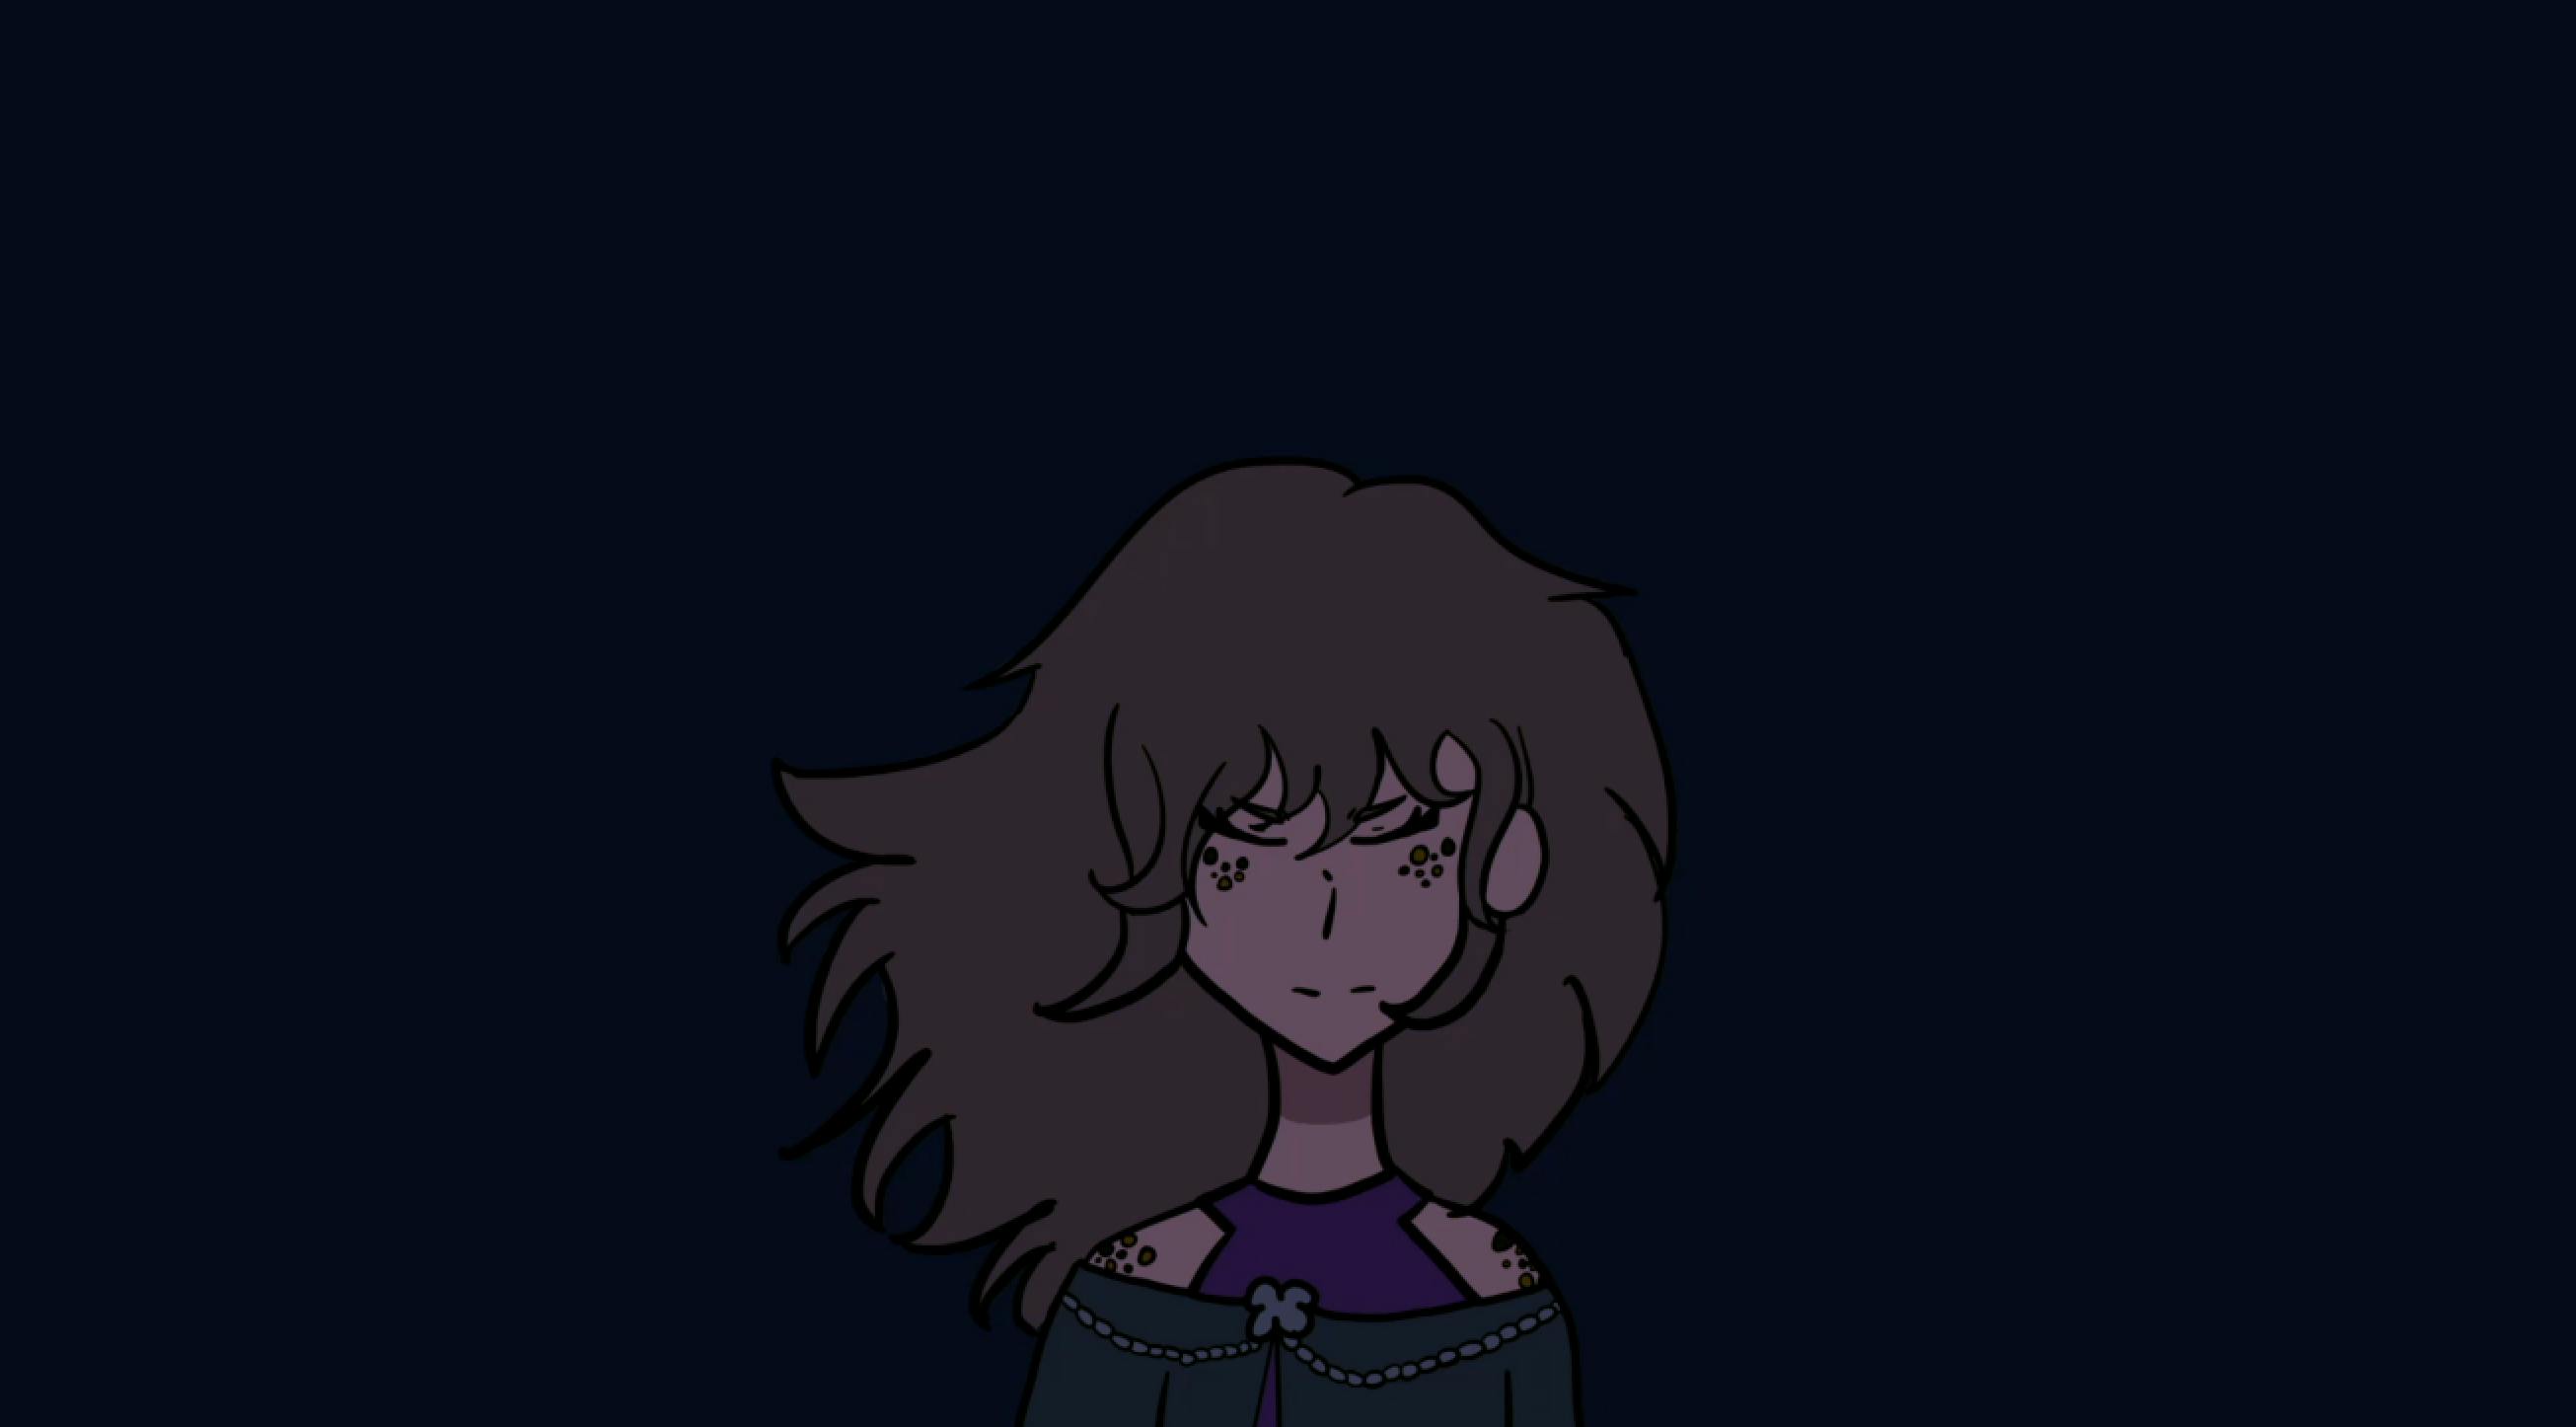 illustration of a girl with freckles with her eyes closed, and her long brown hair blowing in the wind